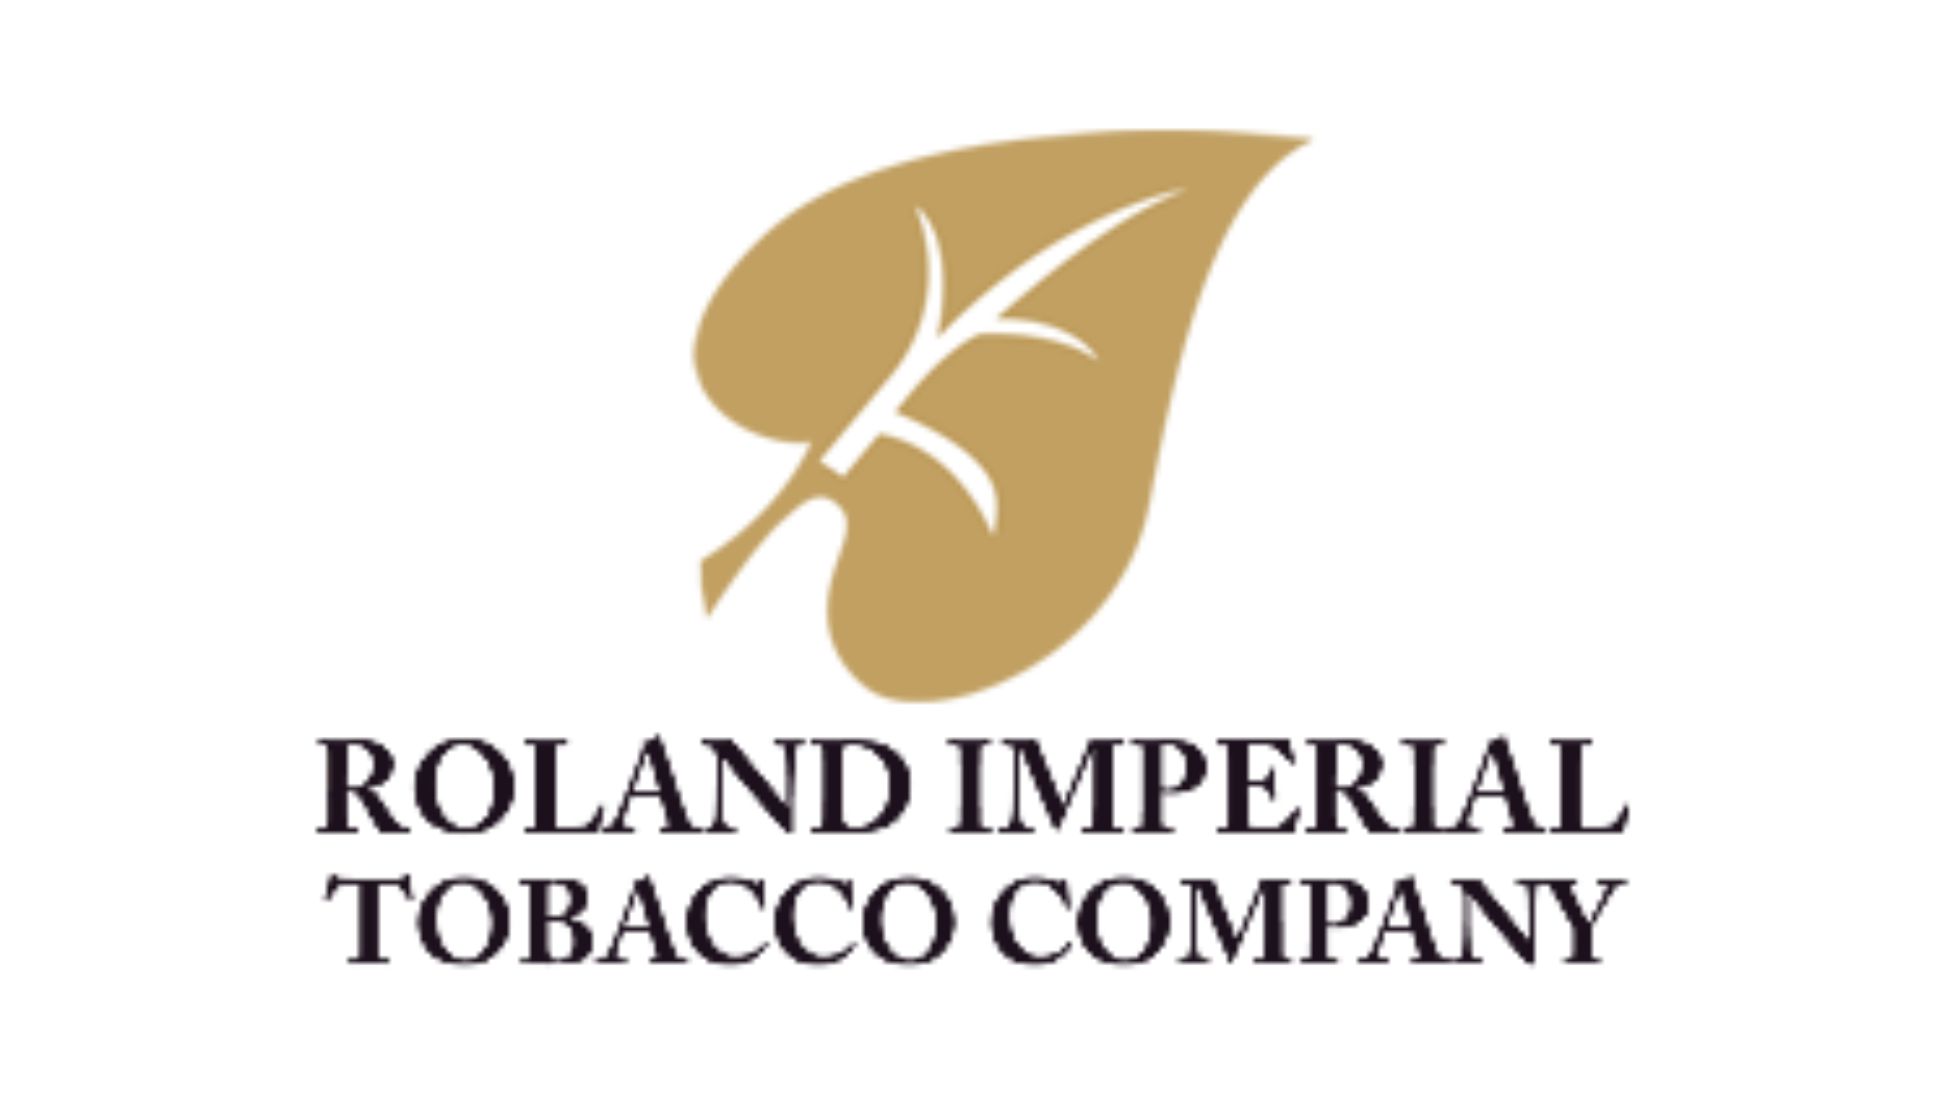 Roland Imperial Tobacco